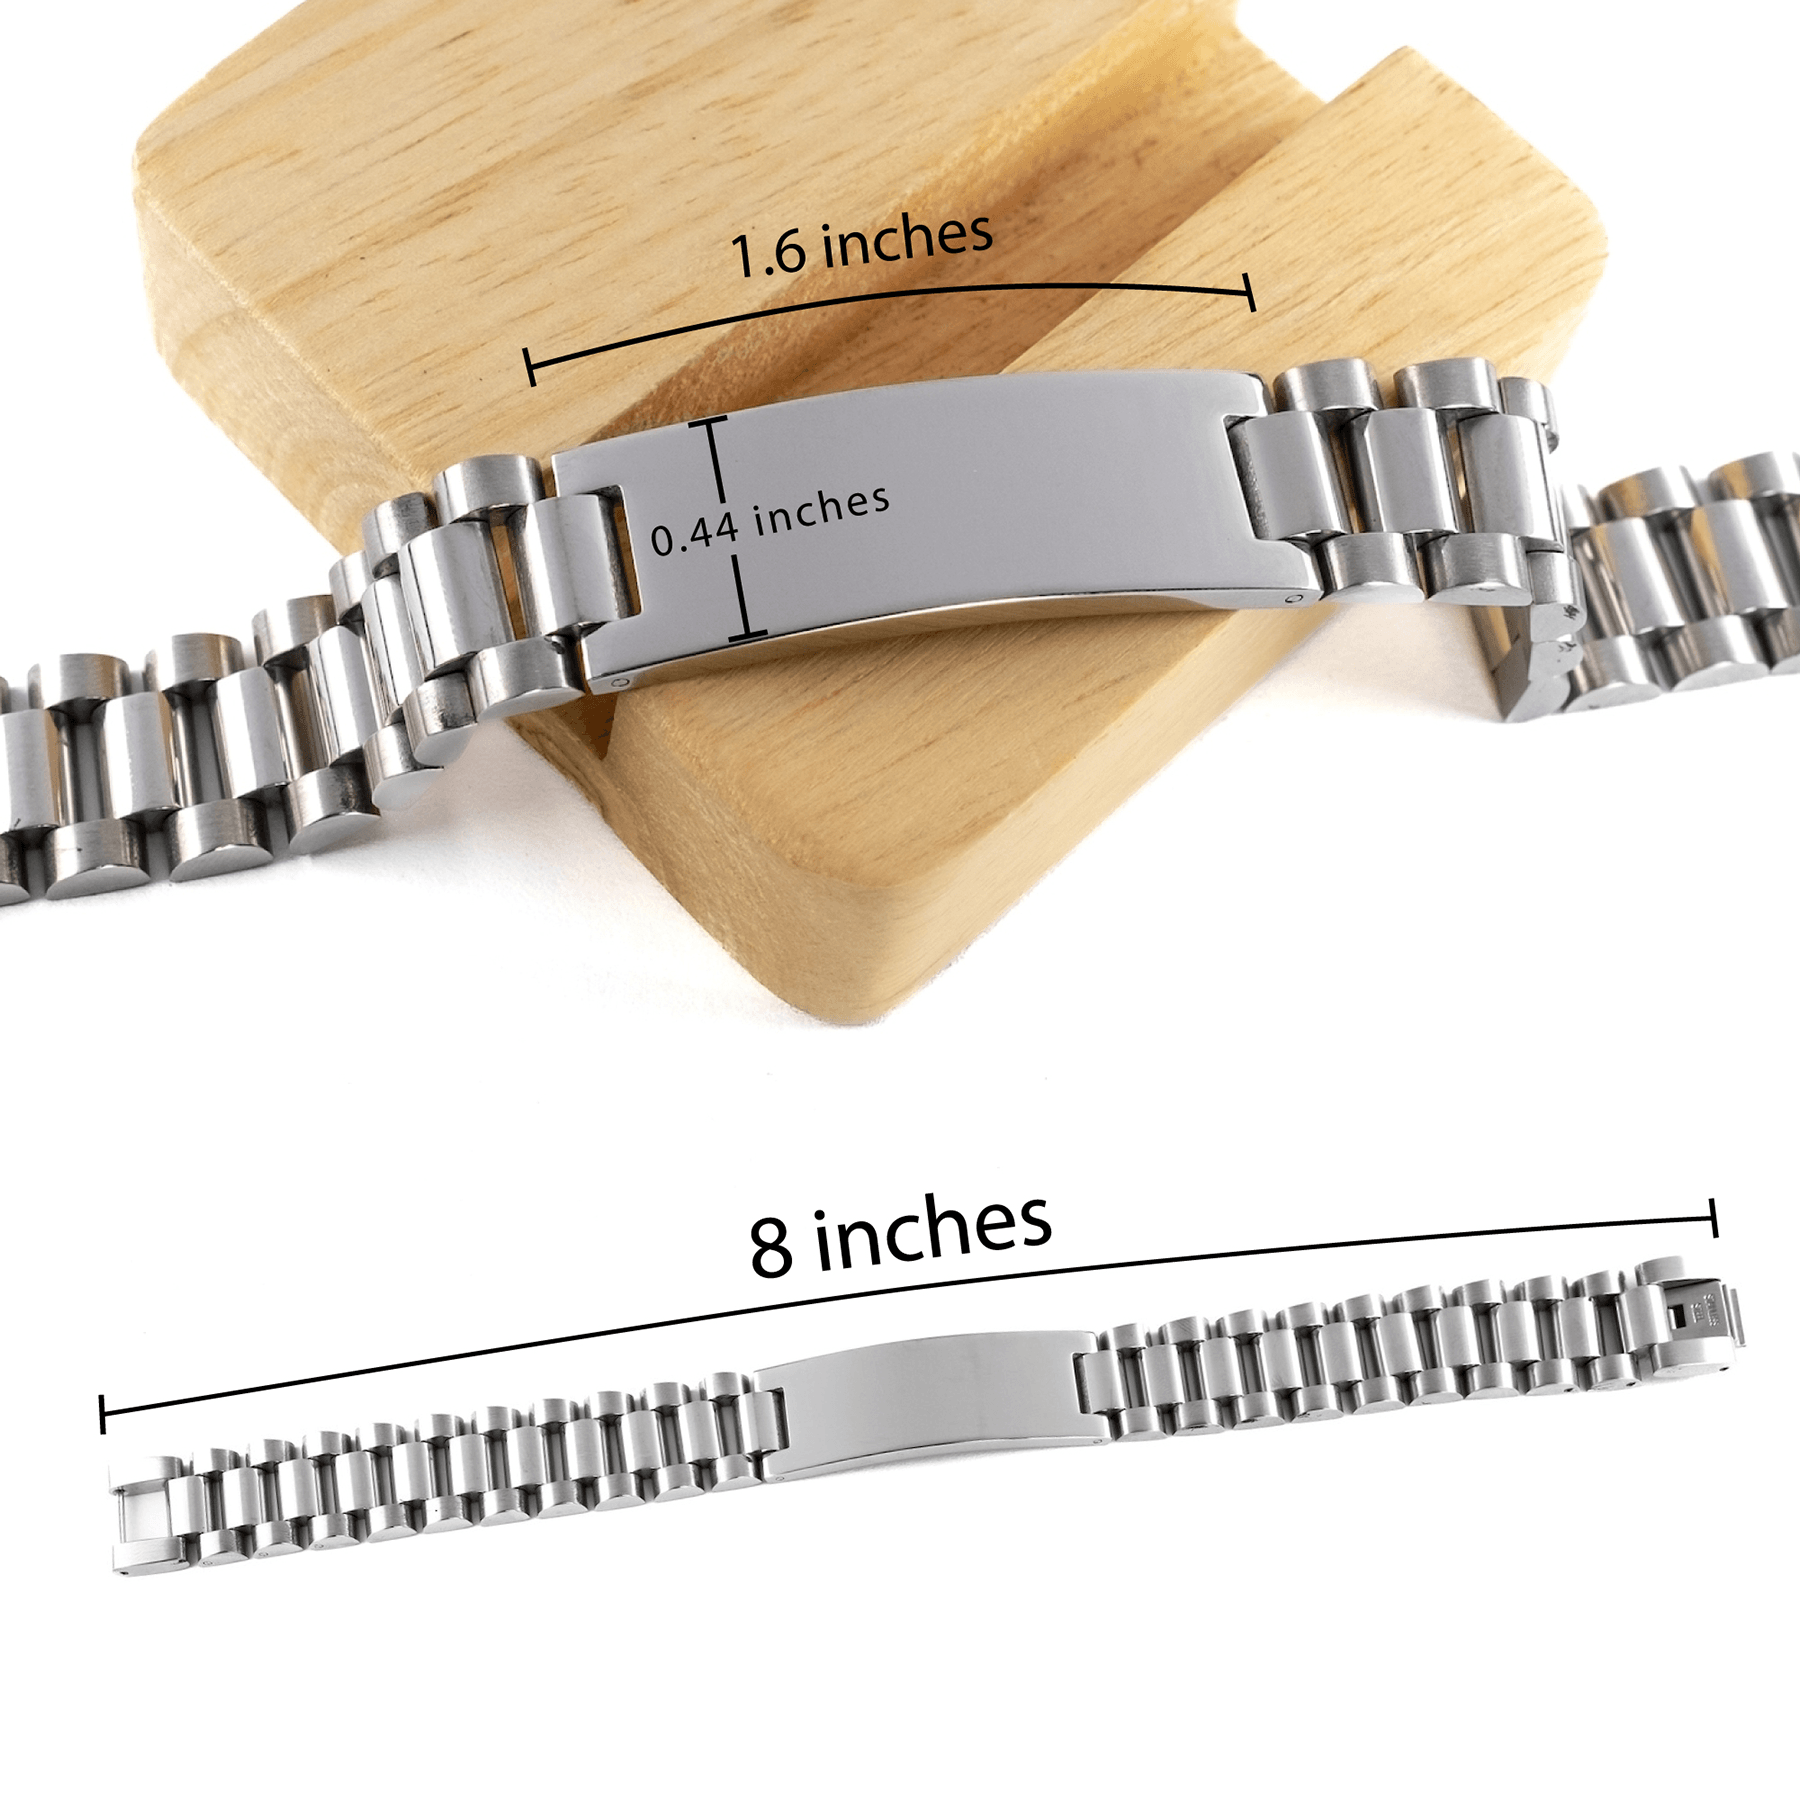 Microbiologist Ladder Stainless Steel Engraved Bracelet - Thanks for being who you are - Birthday Christmas Jewelry Gifts Coworkers Colleague Boss - Mallard Moon Gift Shop